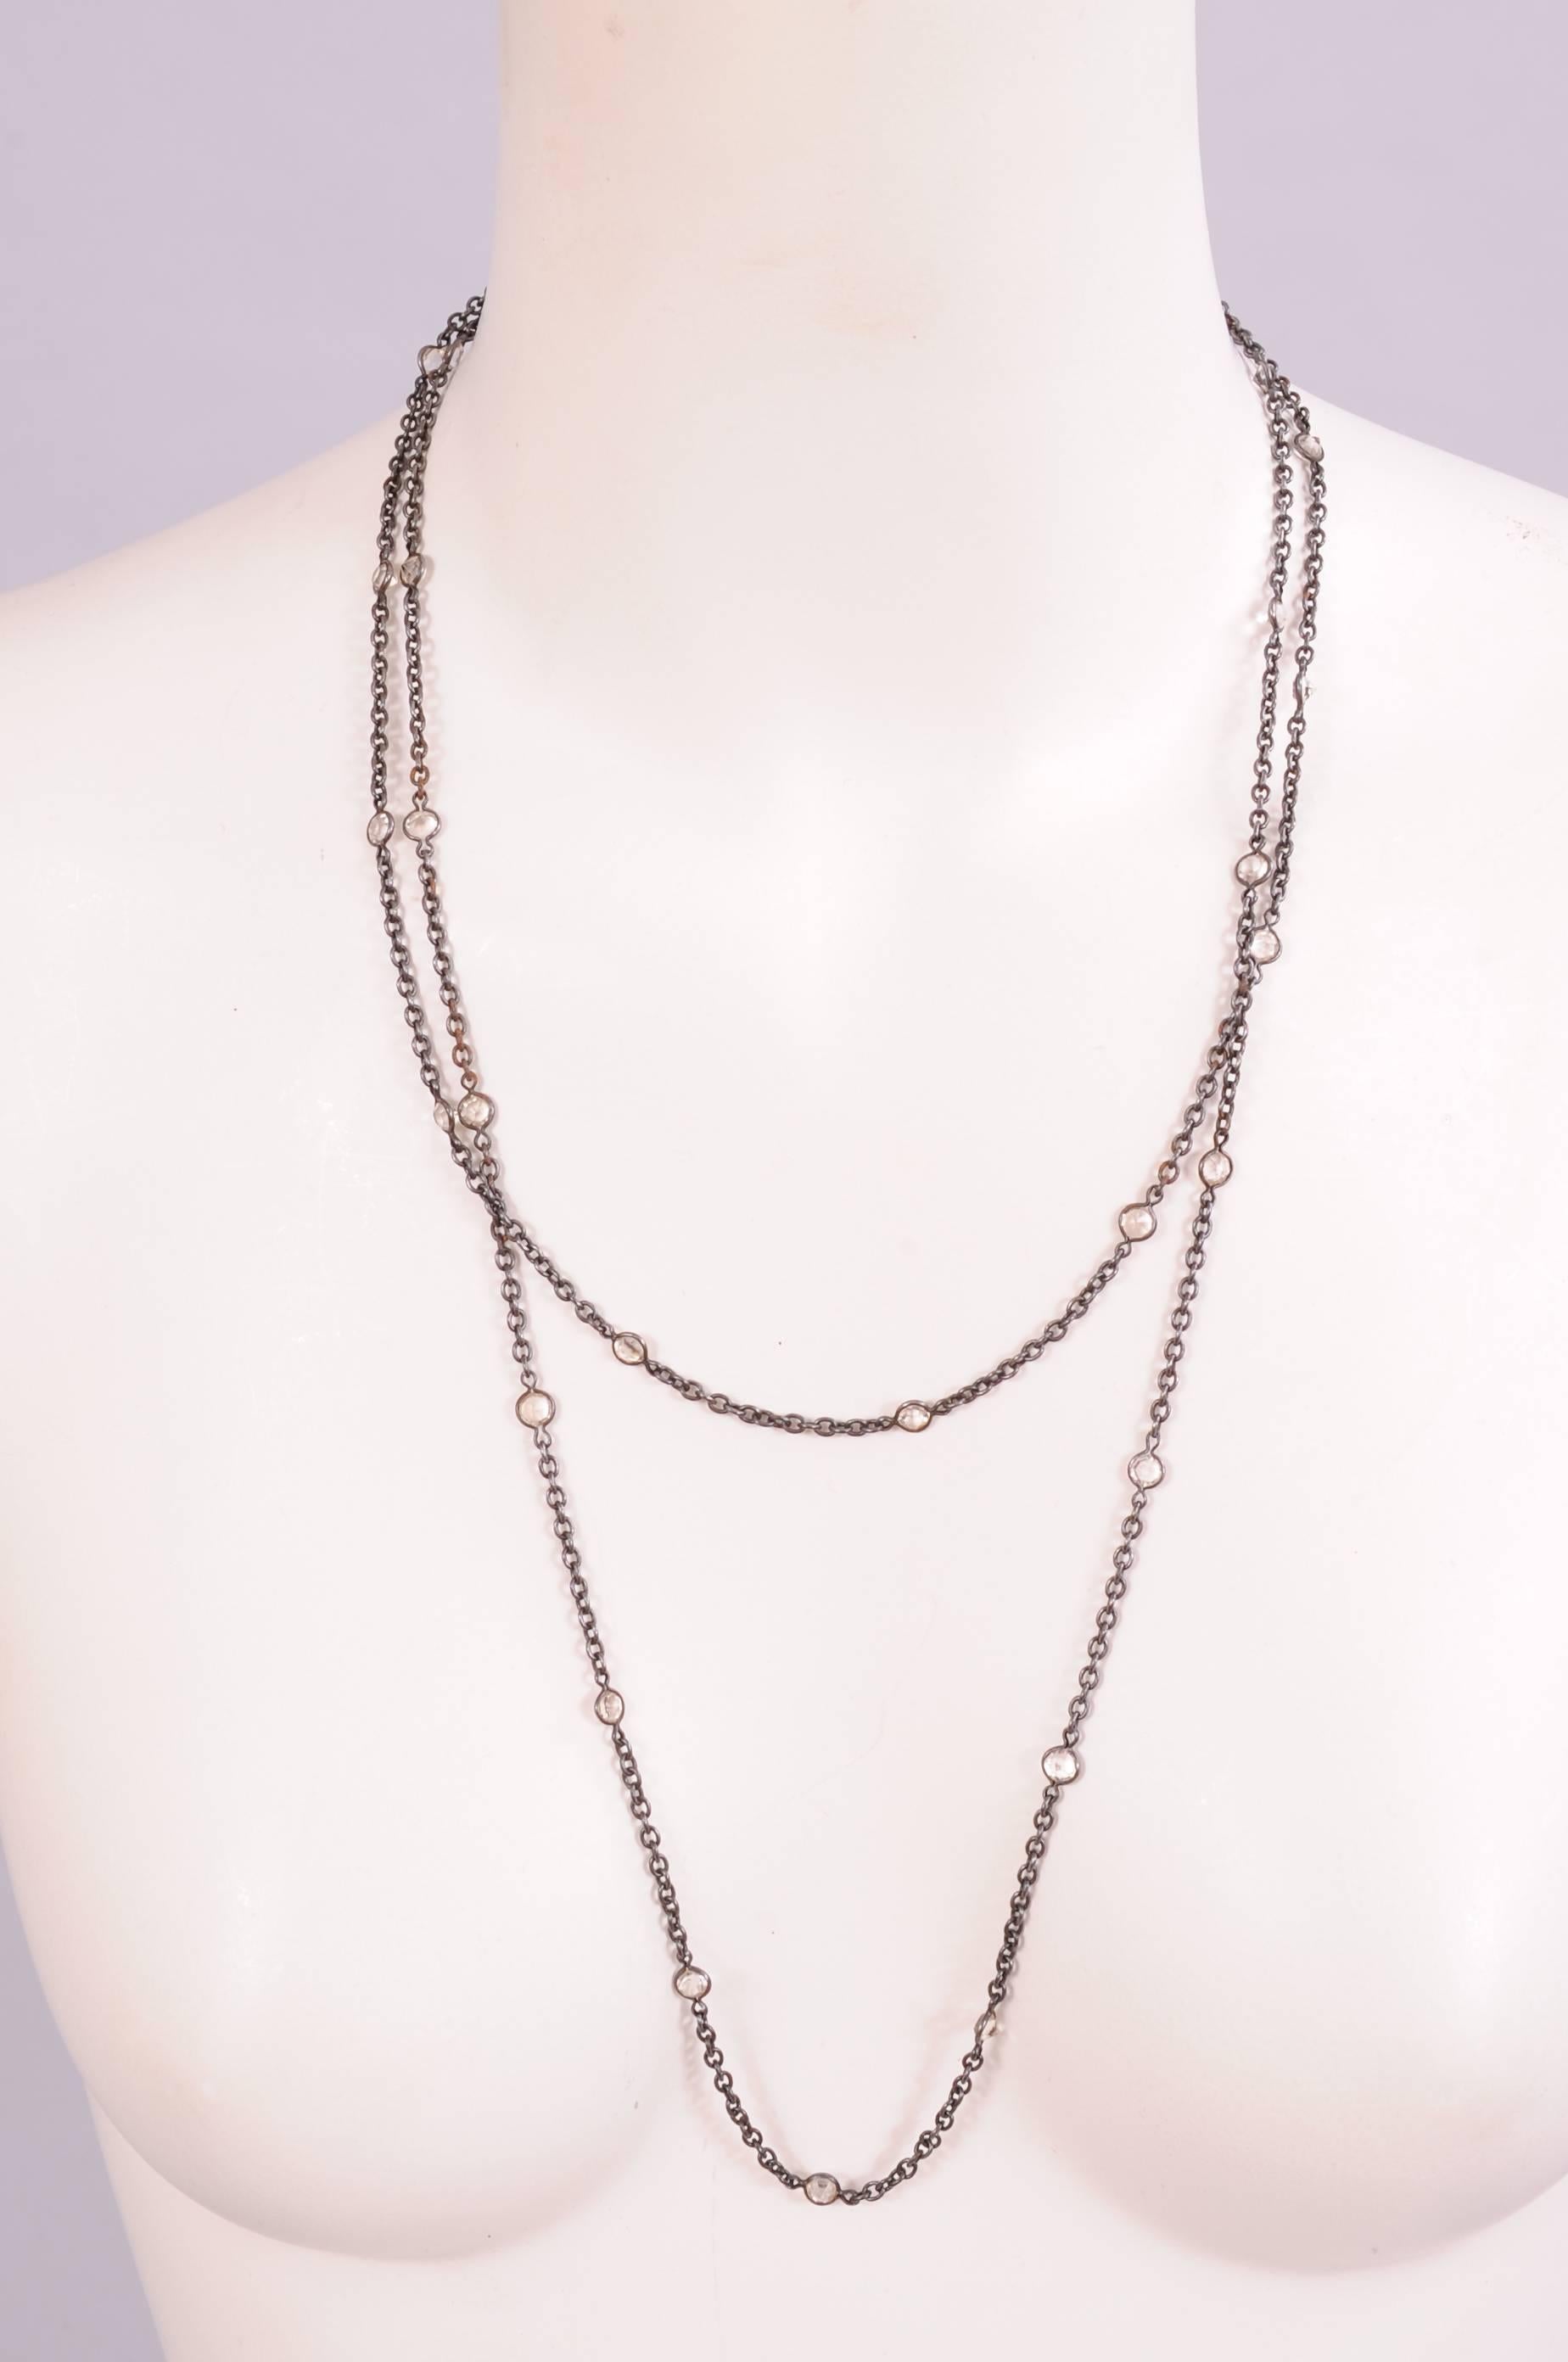 A long and elegant gunmetal chain is embellished with facted faux diamonds every 1 1/2